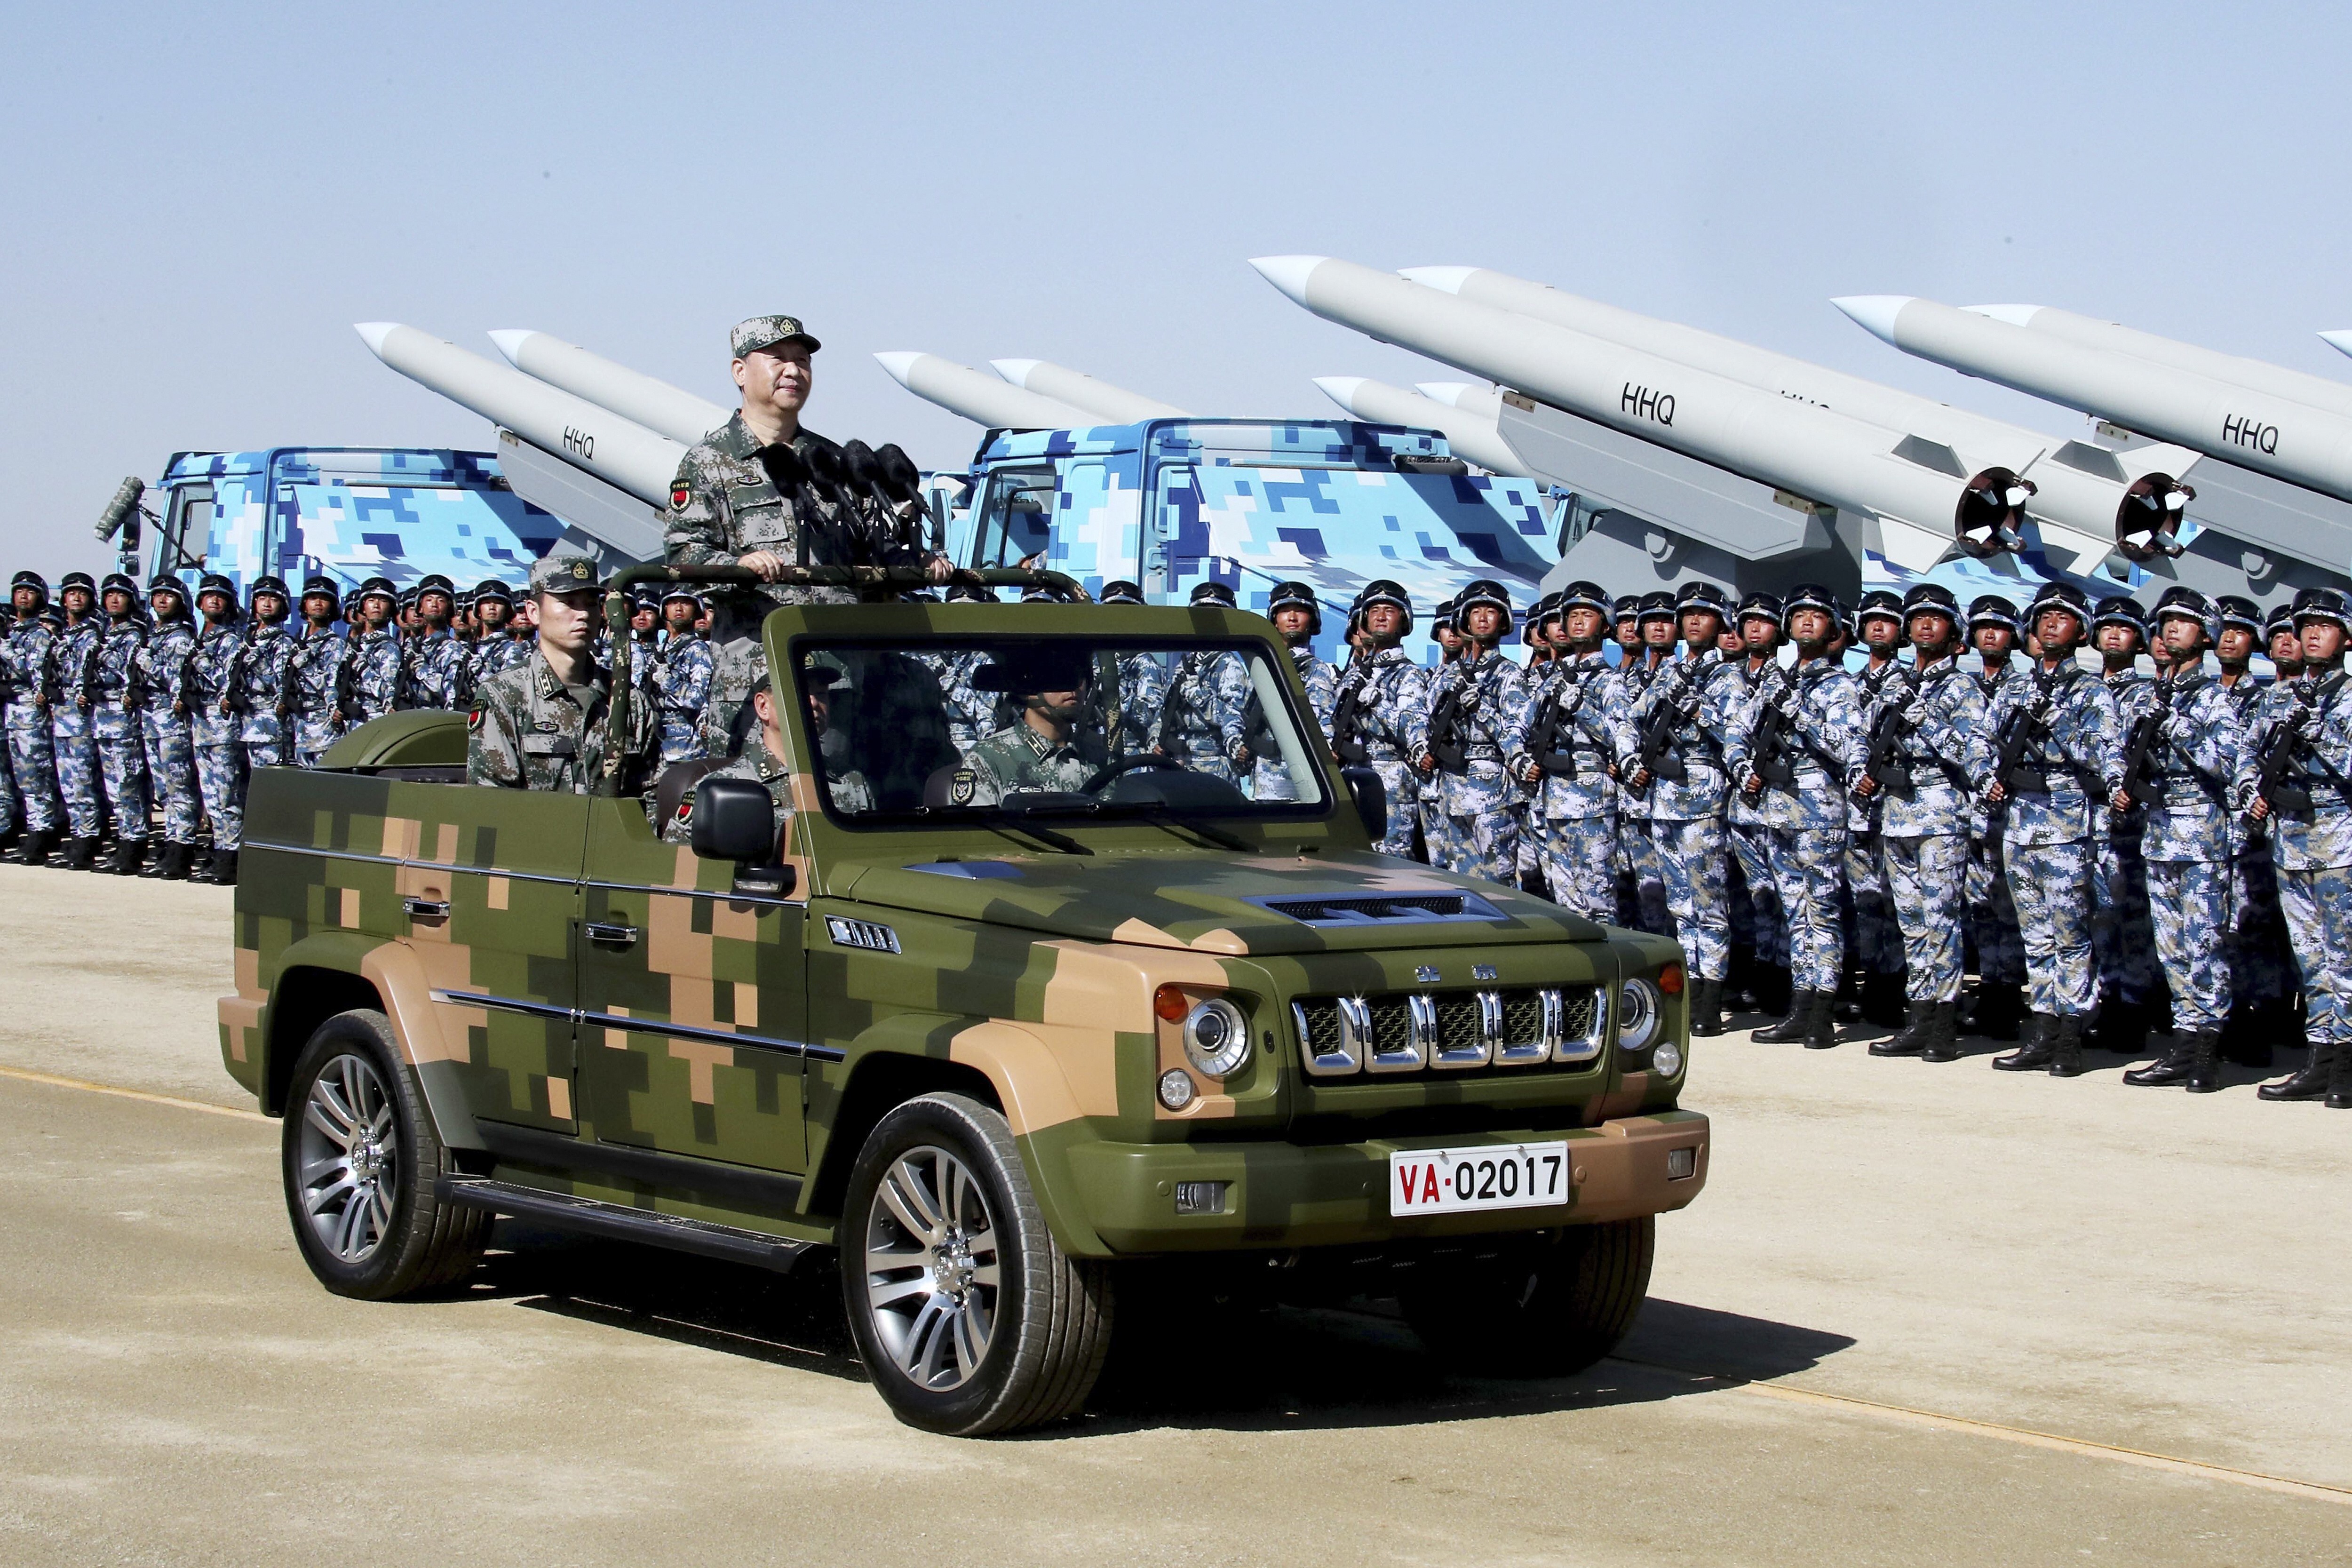 Military-civil fusion is a key part of President Xi Jinping’s plans to modernise the Chinese defence system. Photo: Xinhua via AP